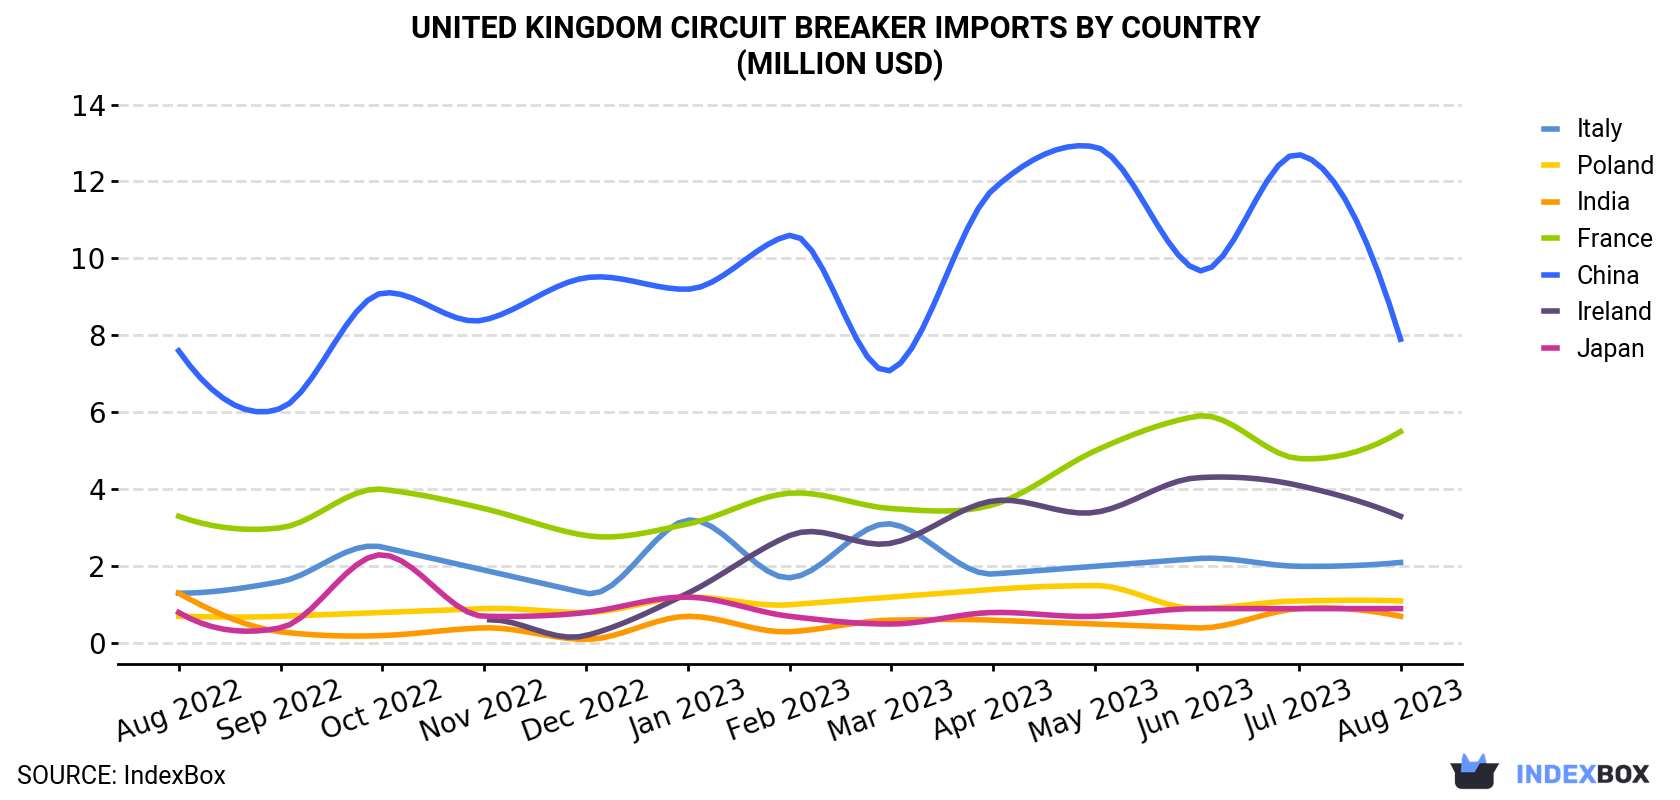 United Kingdom Circuit Breaker Imports By Country (Million USD)